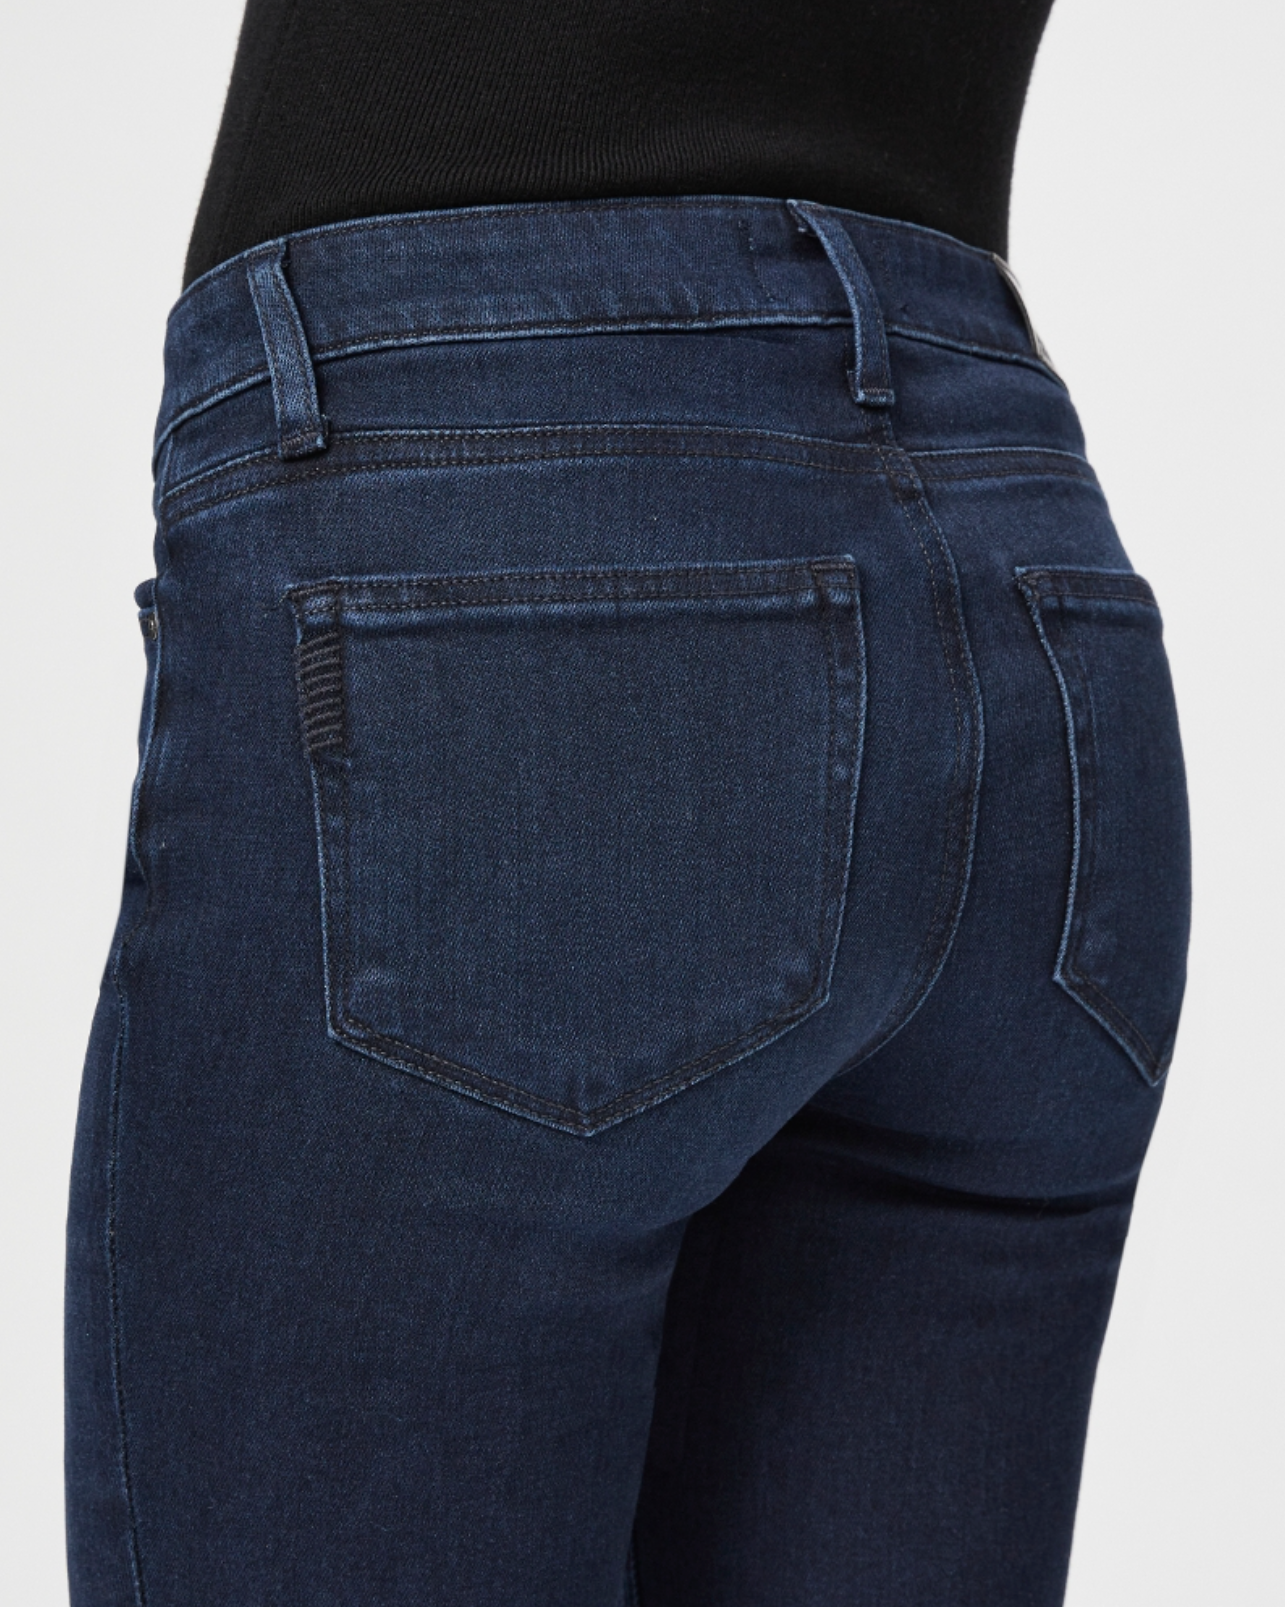 close up rear view of the skyline mid rise straight jean from paige in manifesto dark blue, showing rear pocket detail